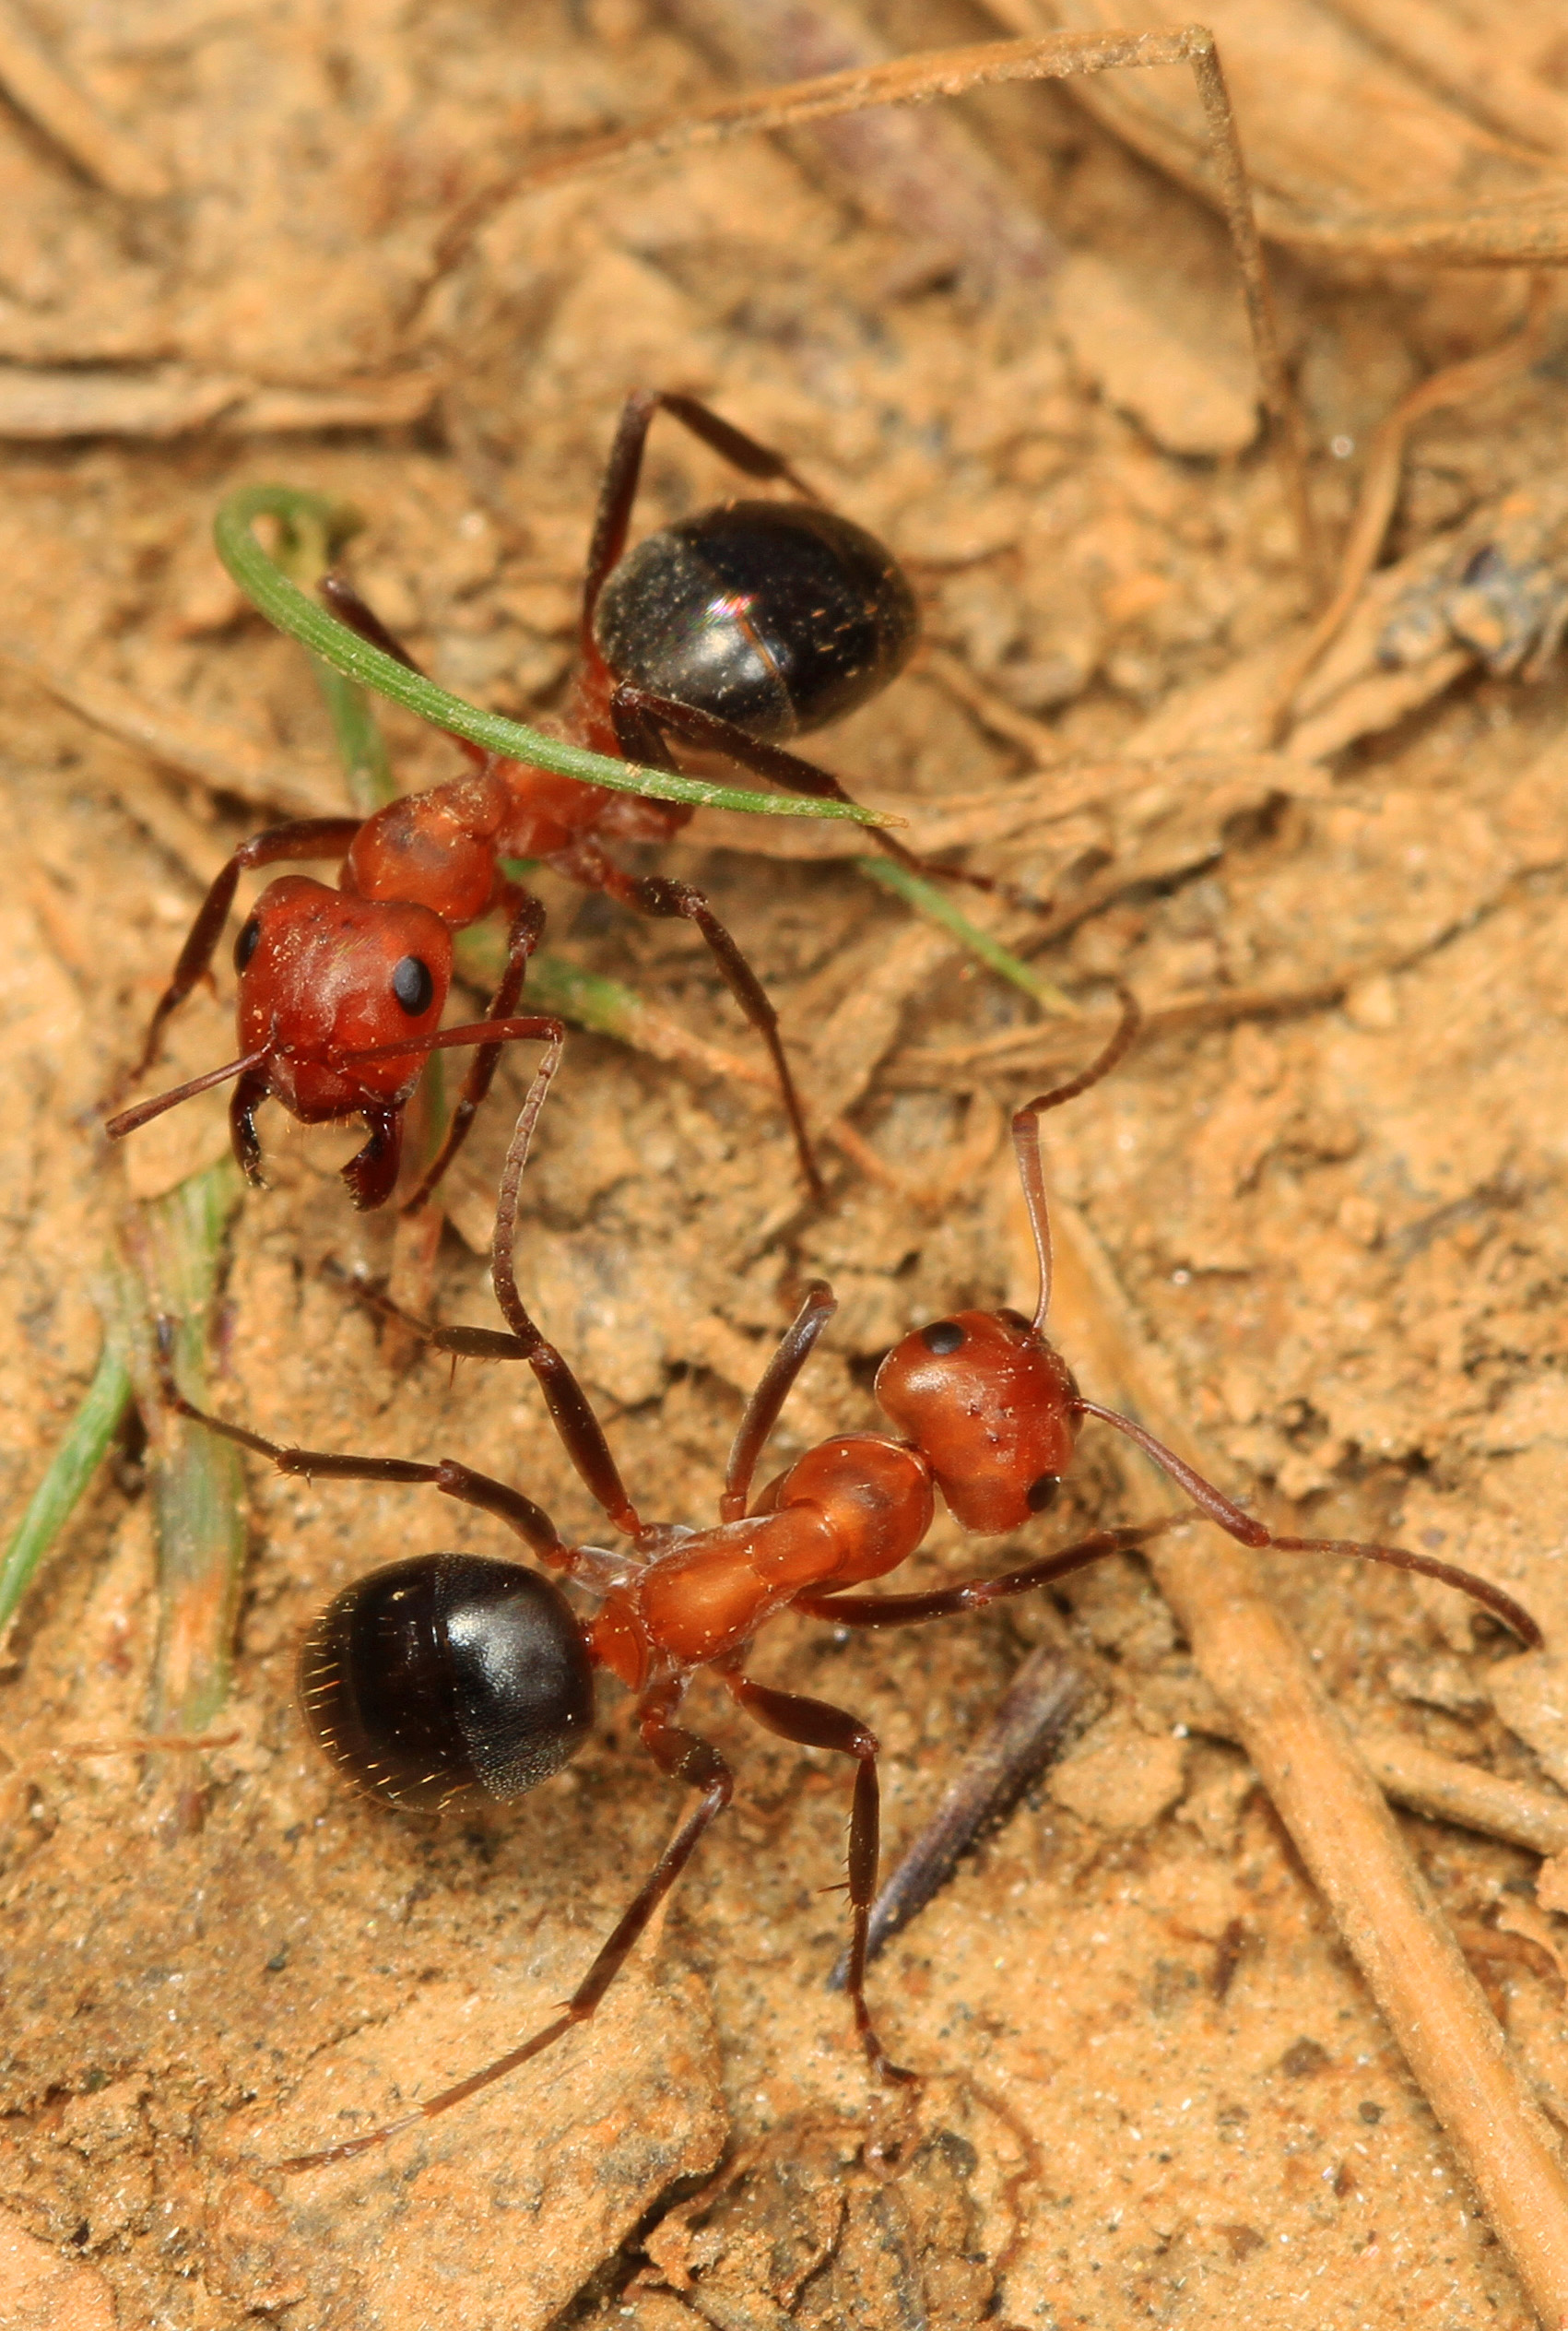 Day 123 - Allegheny Mound Ant - Formica exsectoides, Soldier's Delight, Owings Mills, Maryland